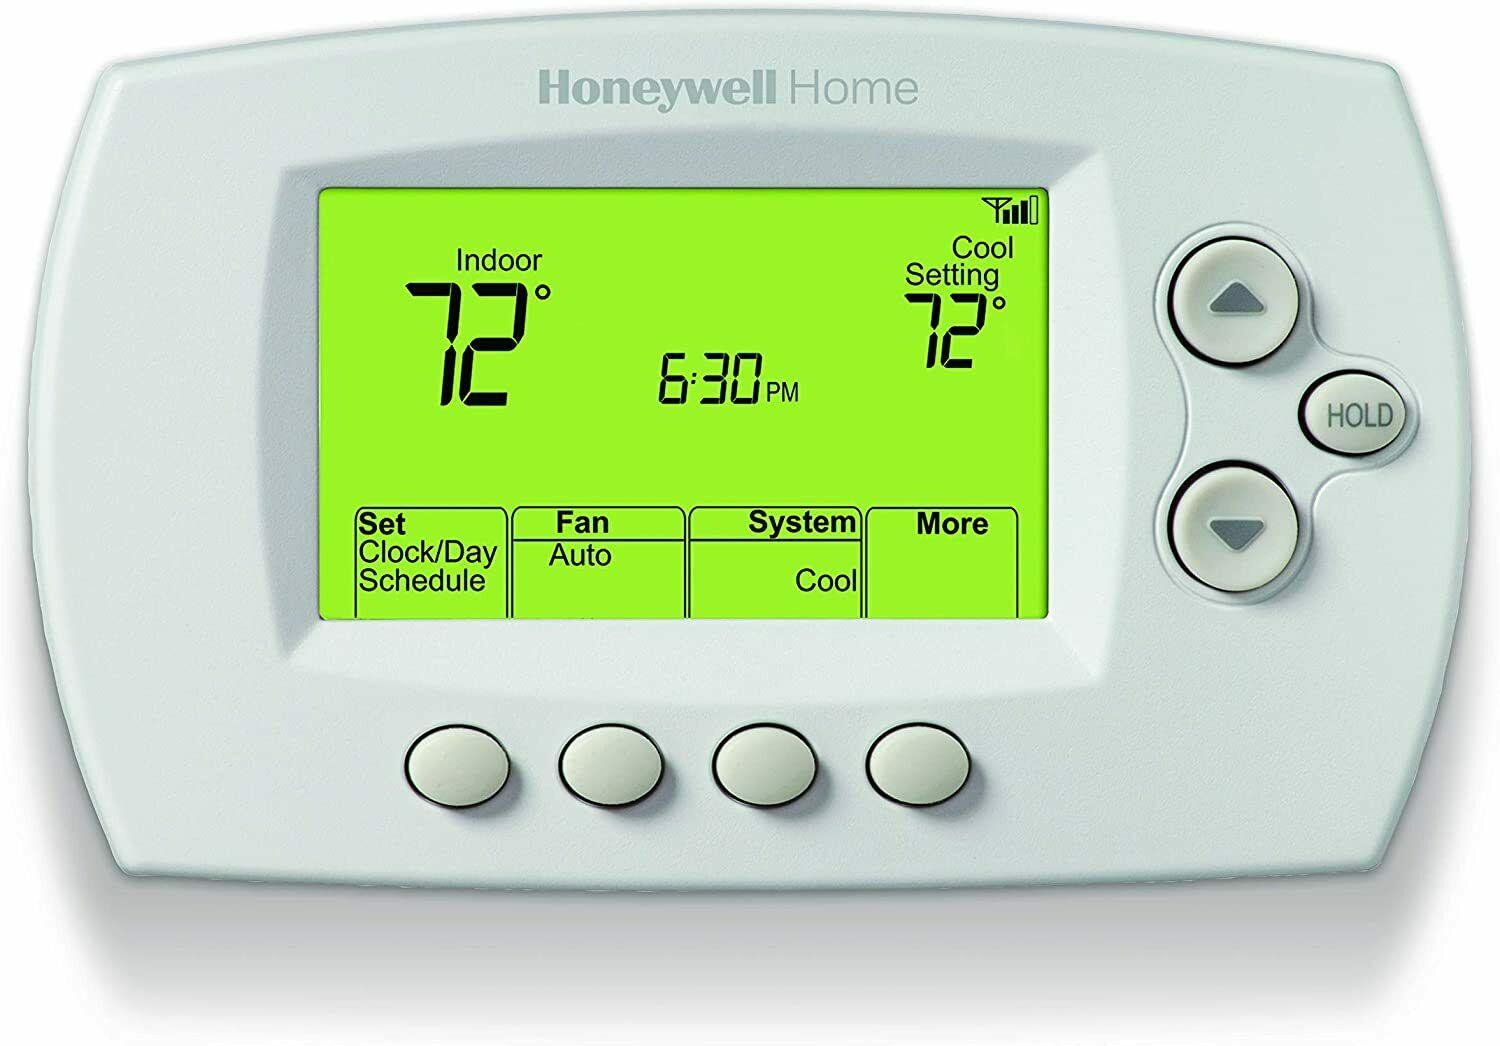 Honeywell Home Wi-Fi 7-Day Programmable Thermostat for $36.99 Shipped